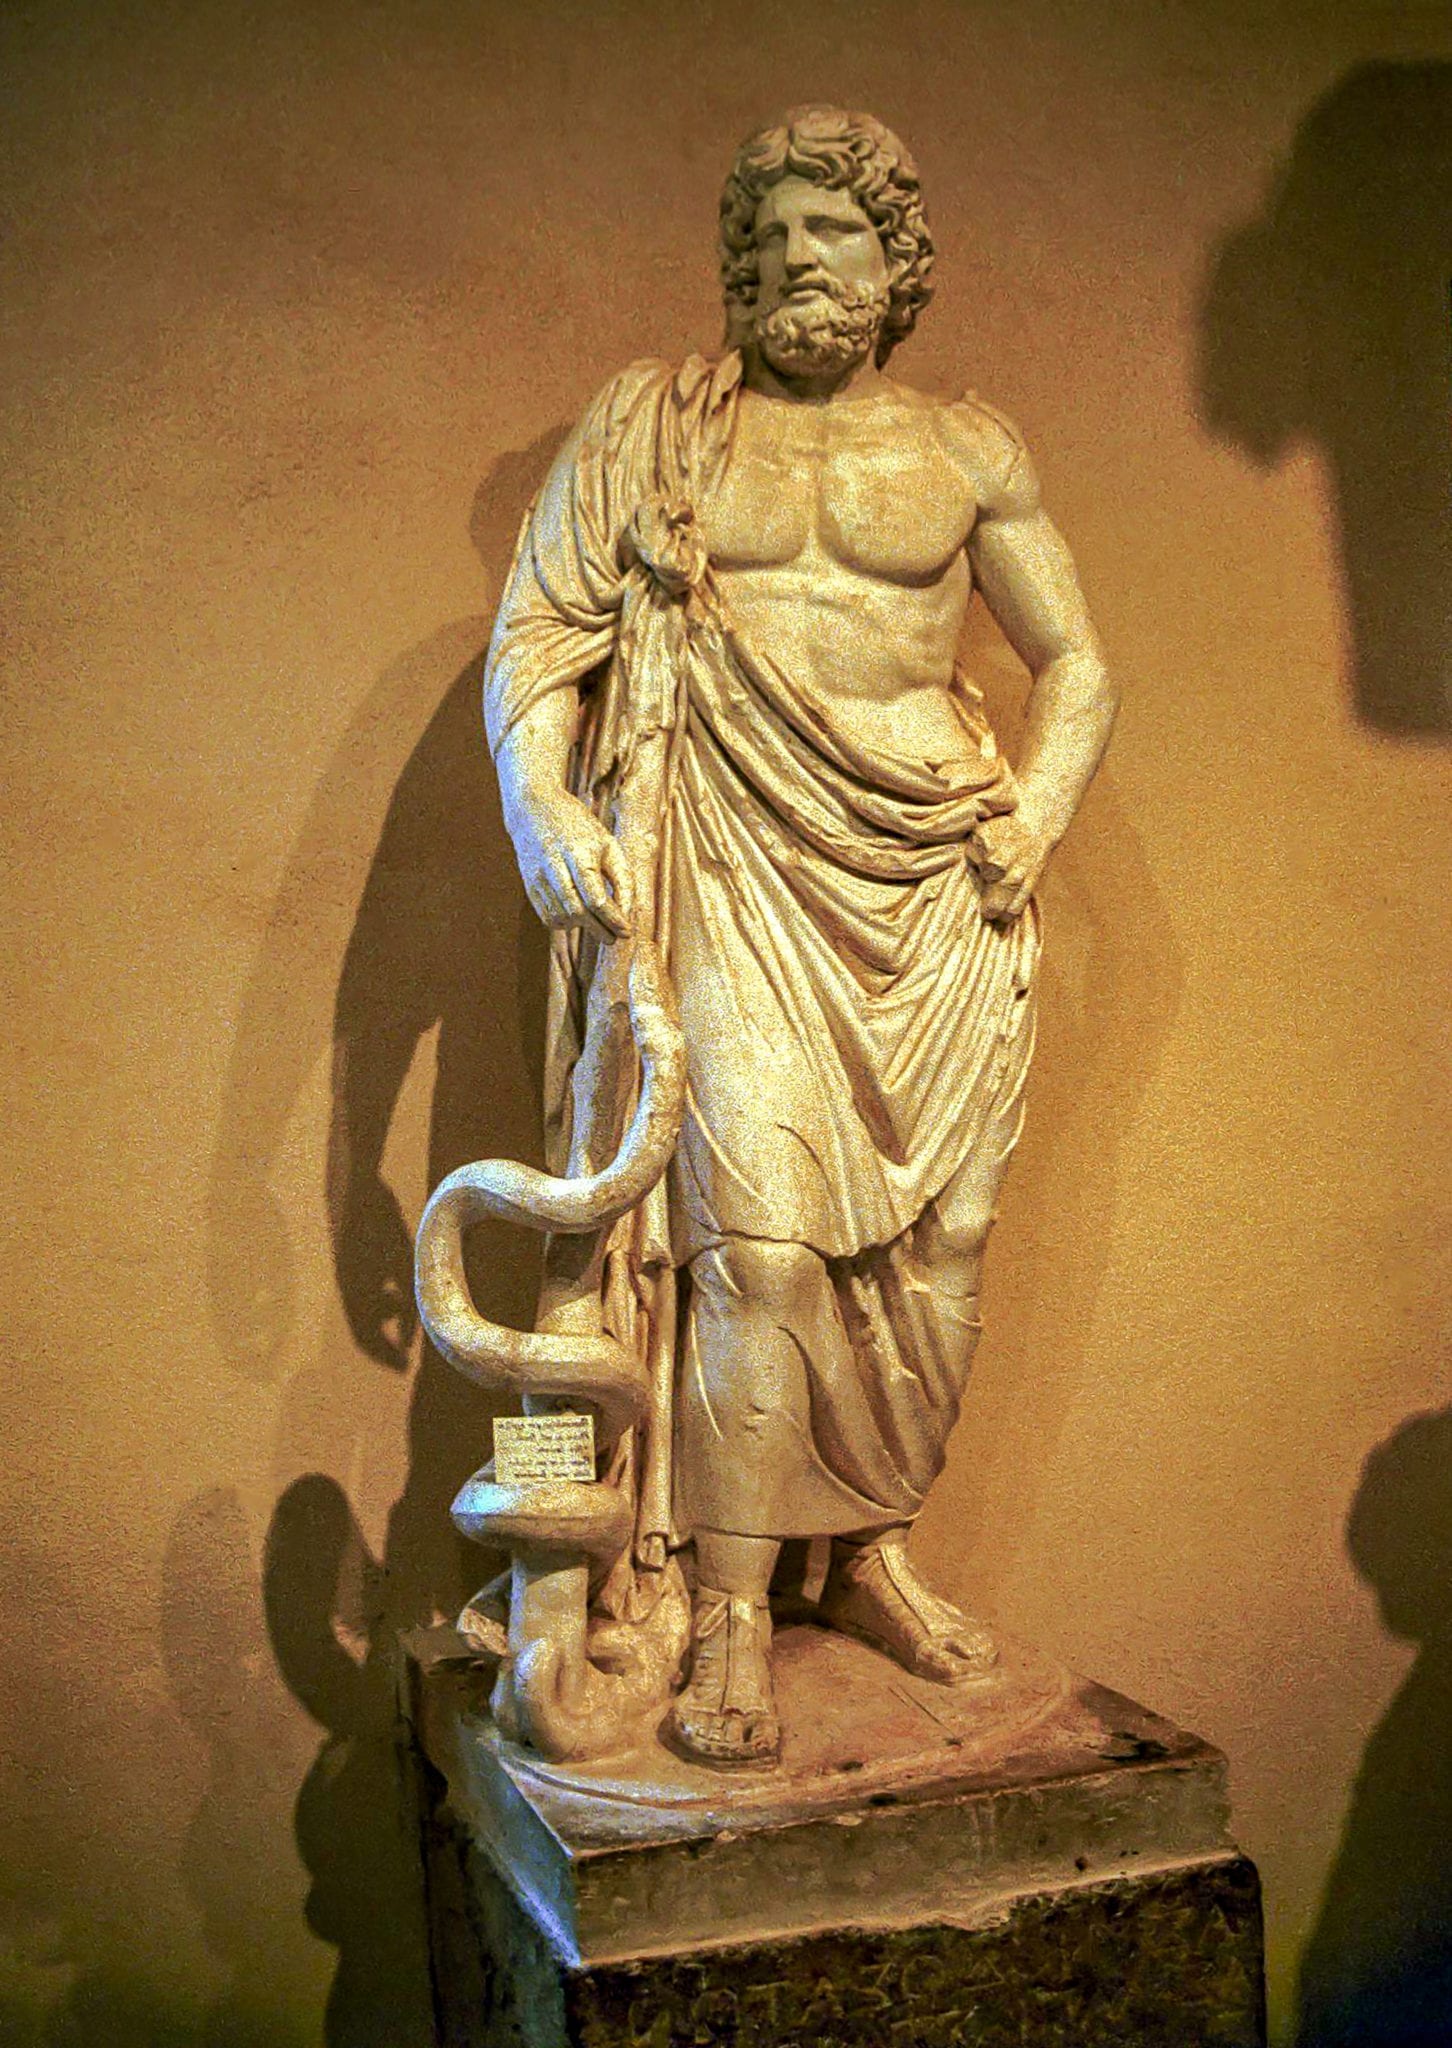 Statue of Asclepius with his staff